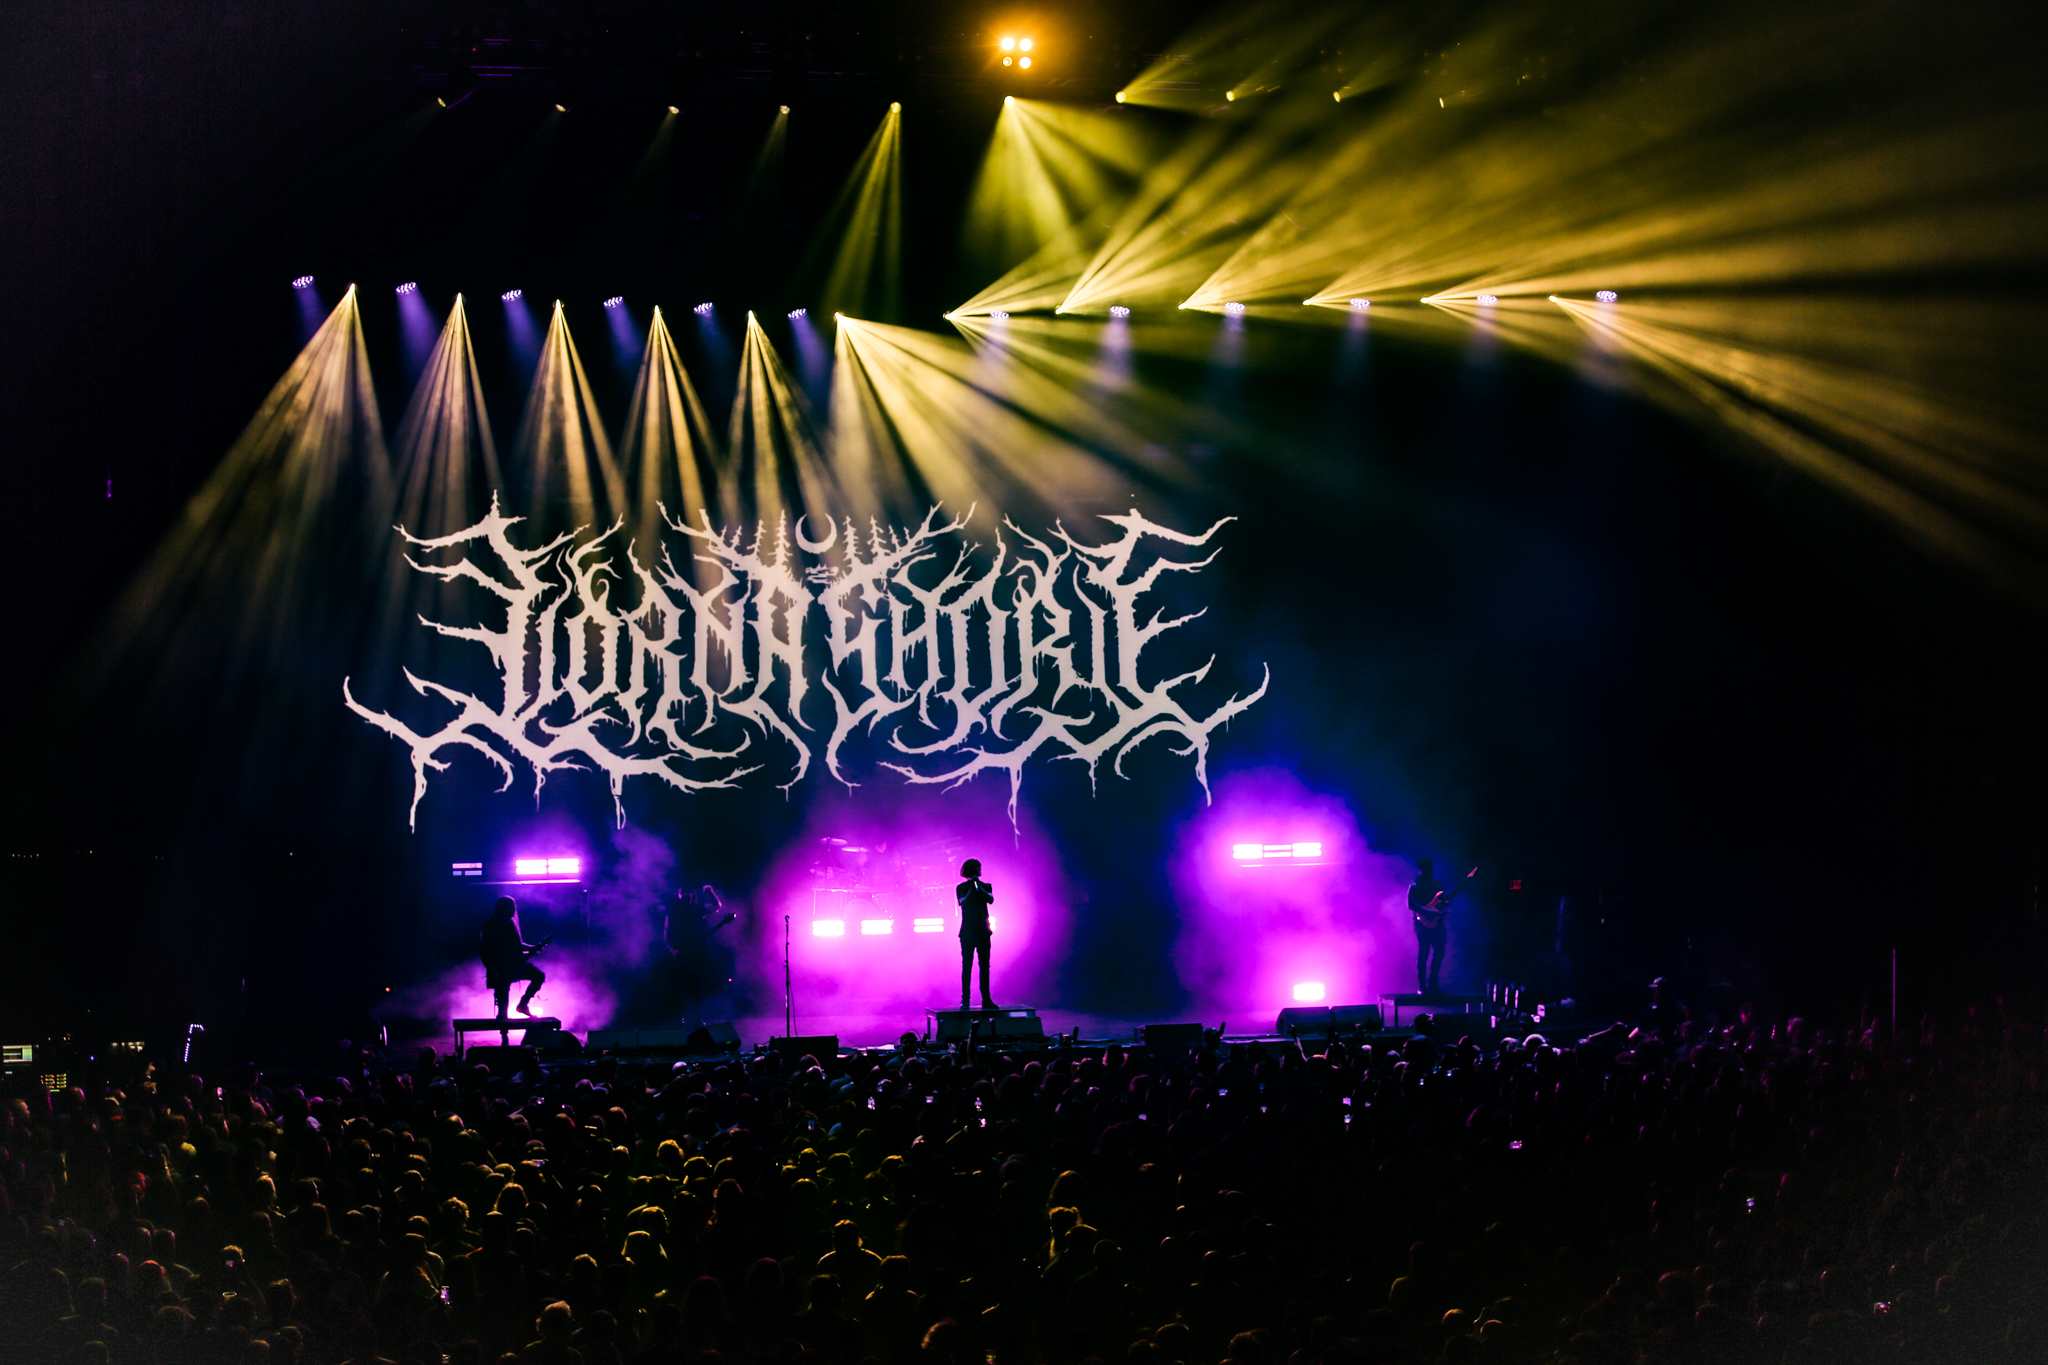 Lorna Shore music concerts and photography